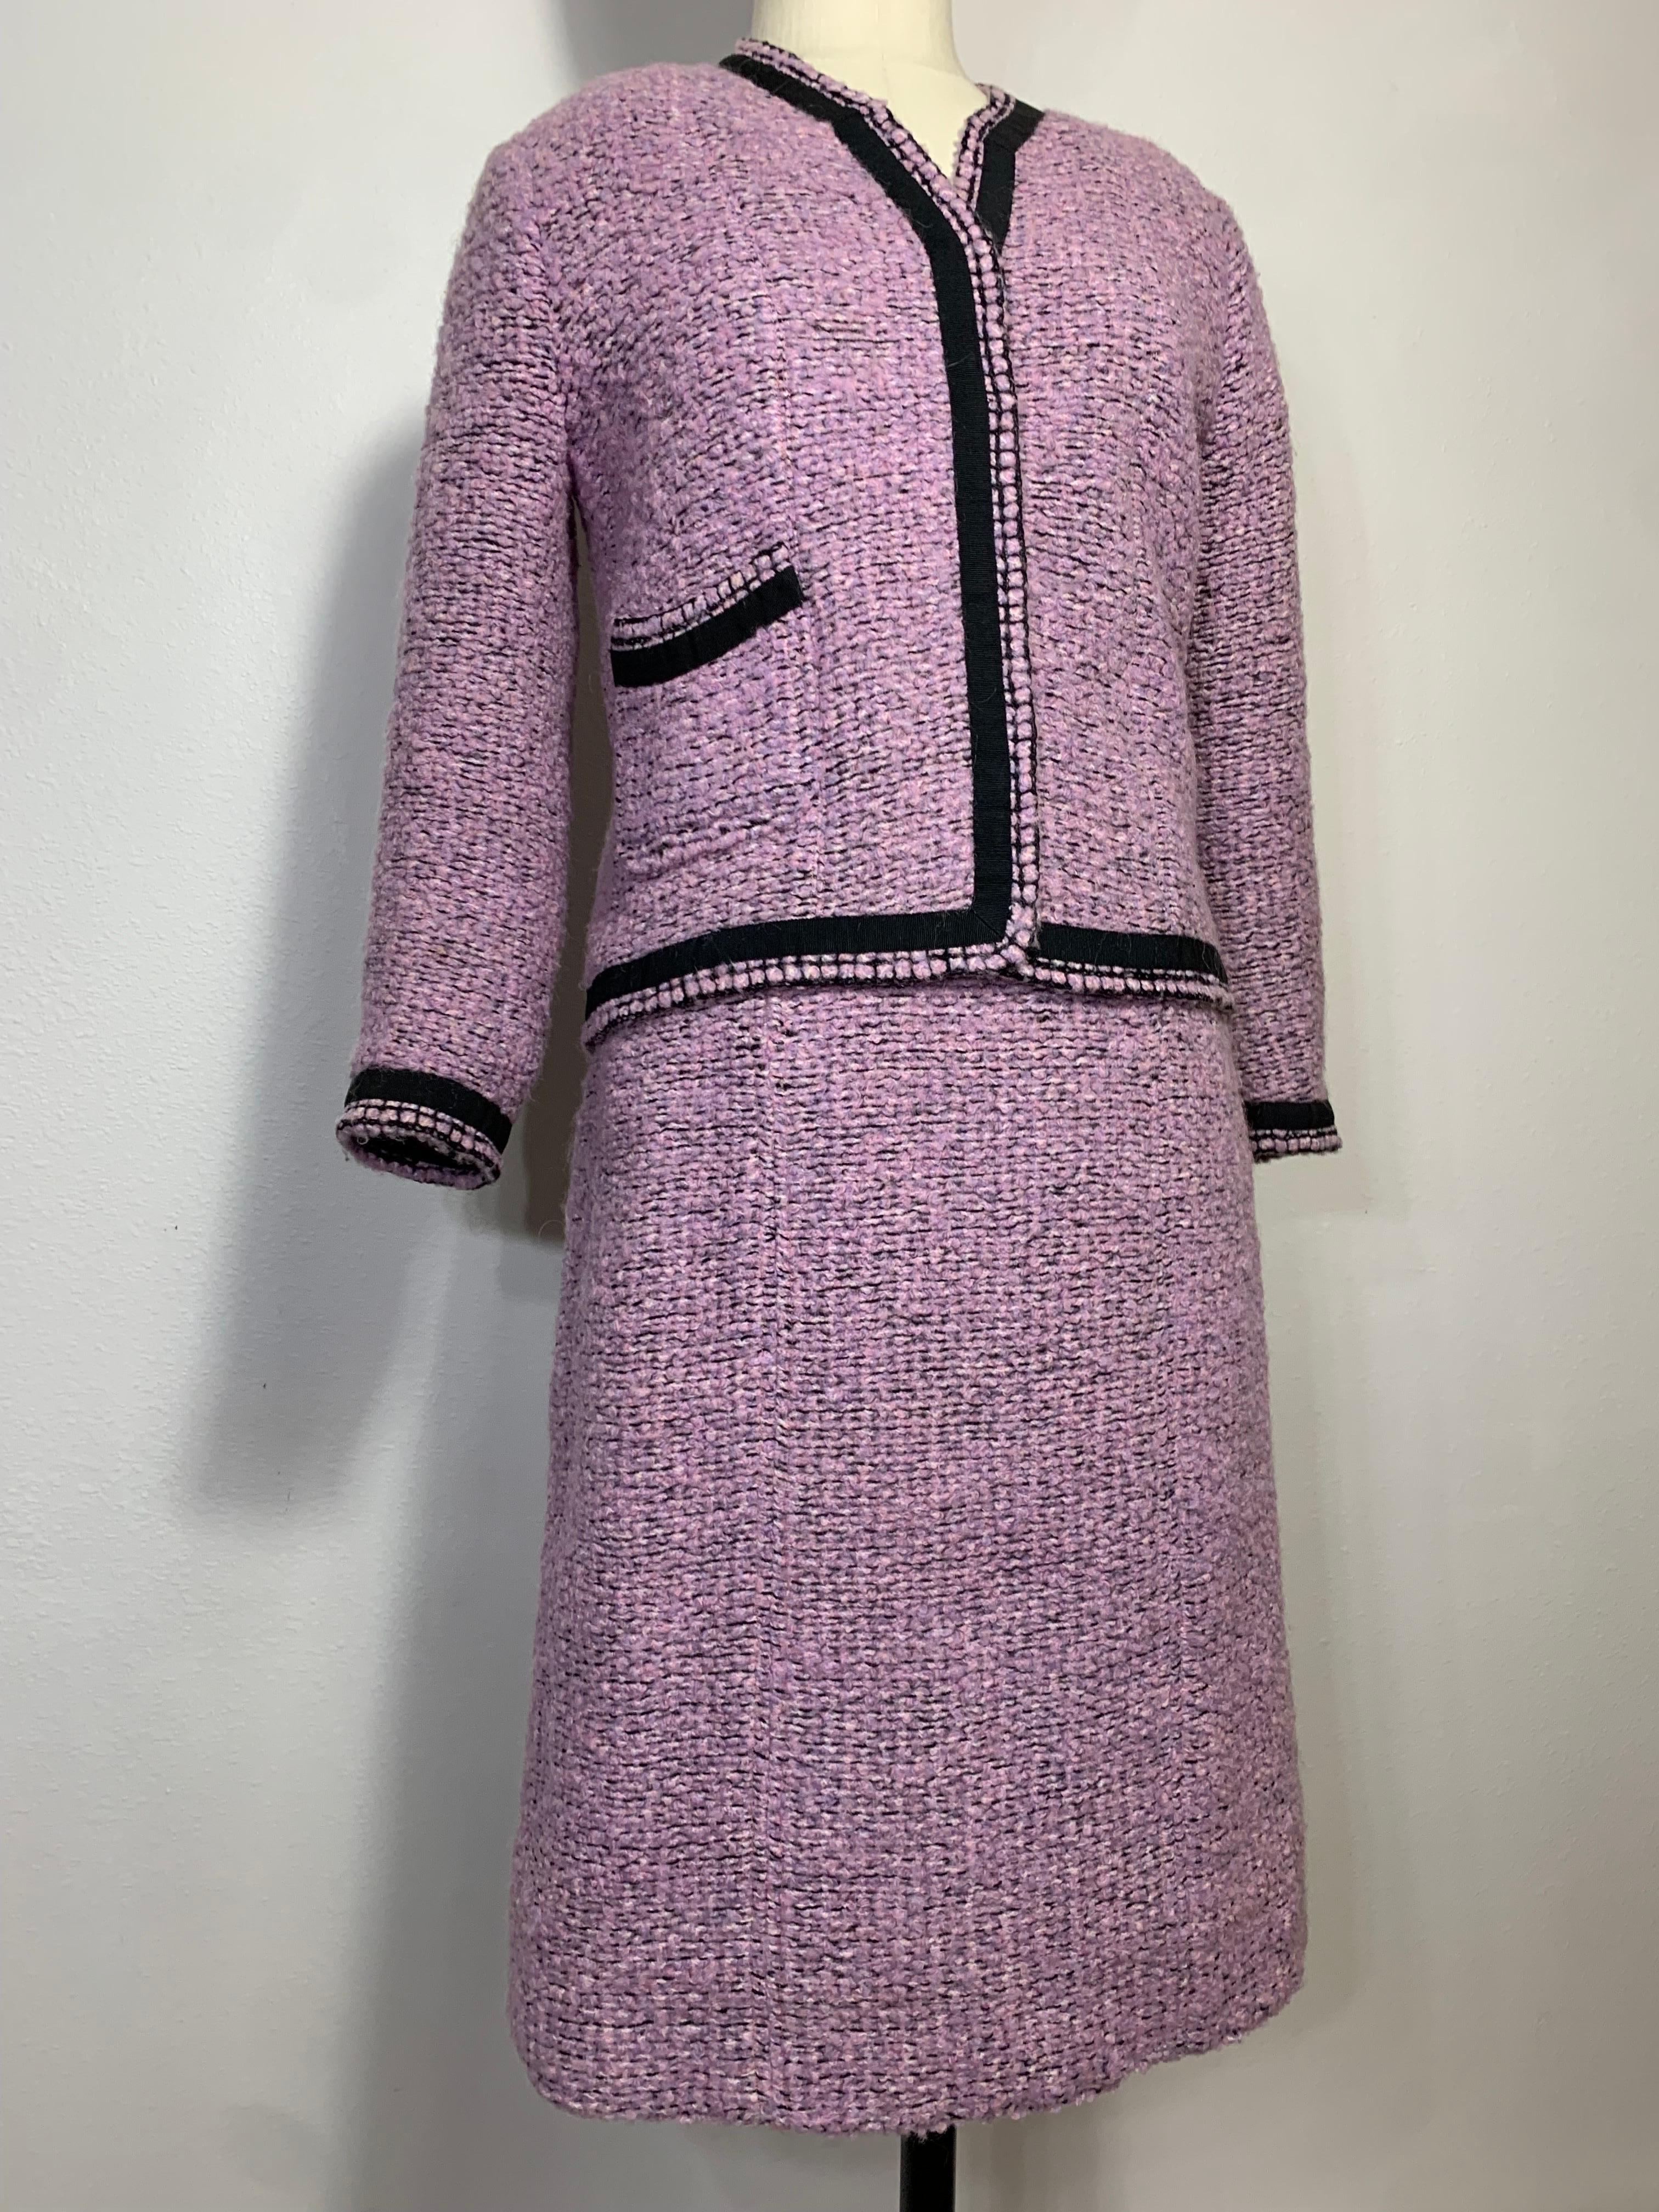 1960 Autumn/Winter Chanel Haute Couture Documented Lavender Tweed Skirt Suit  For Sale 1